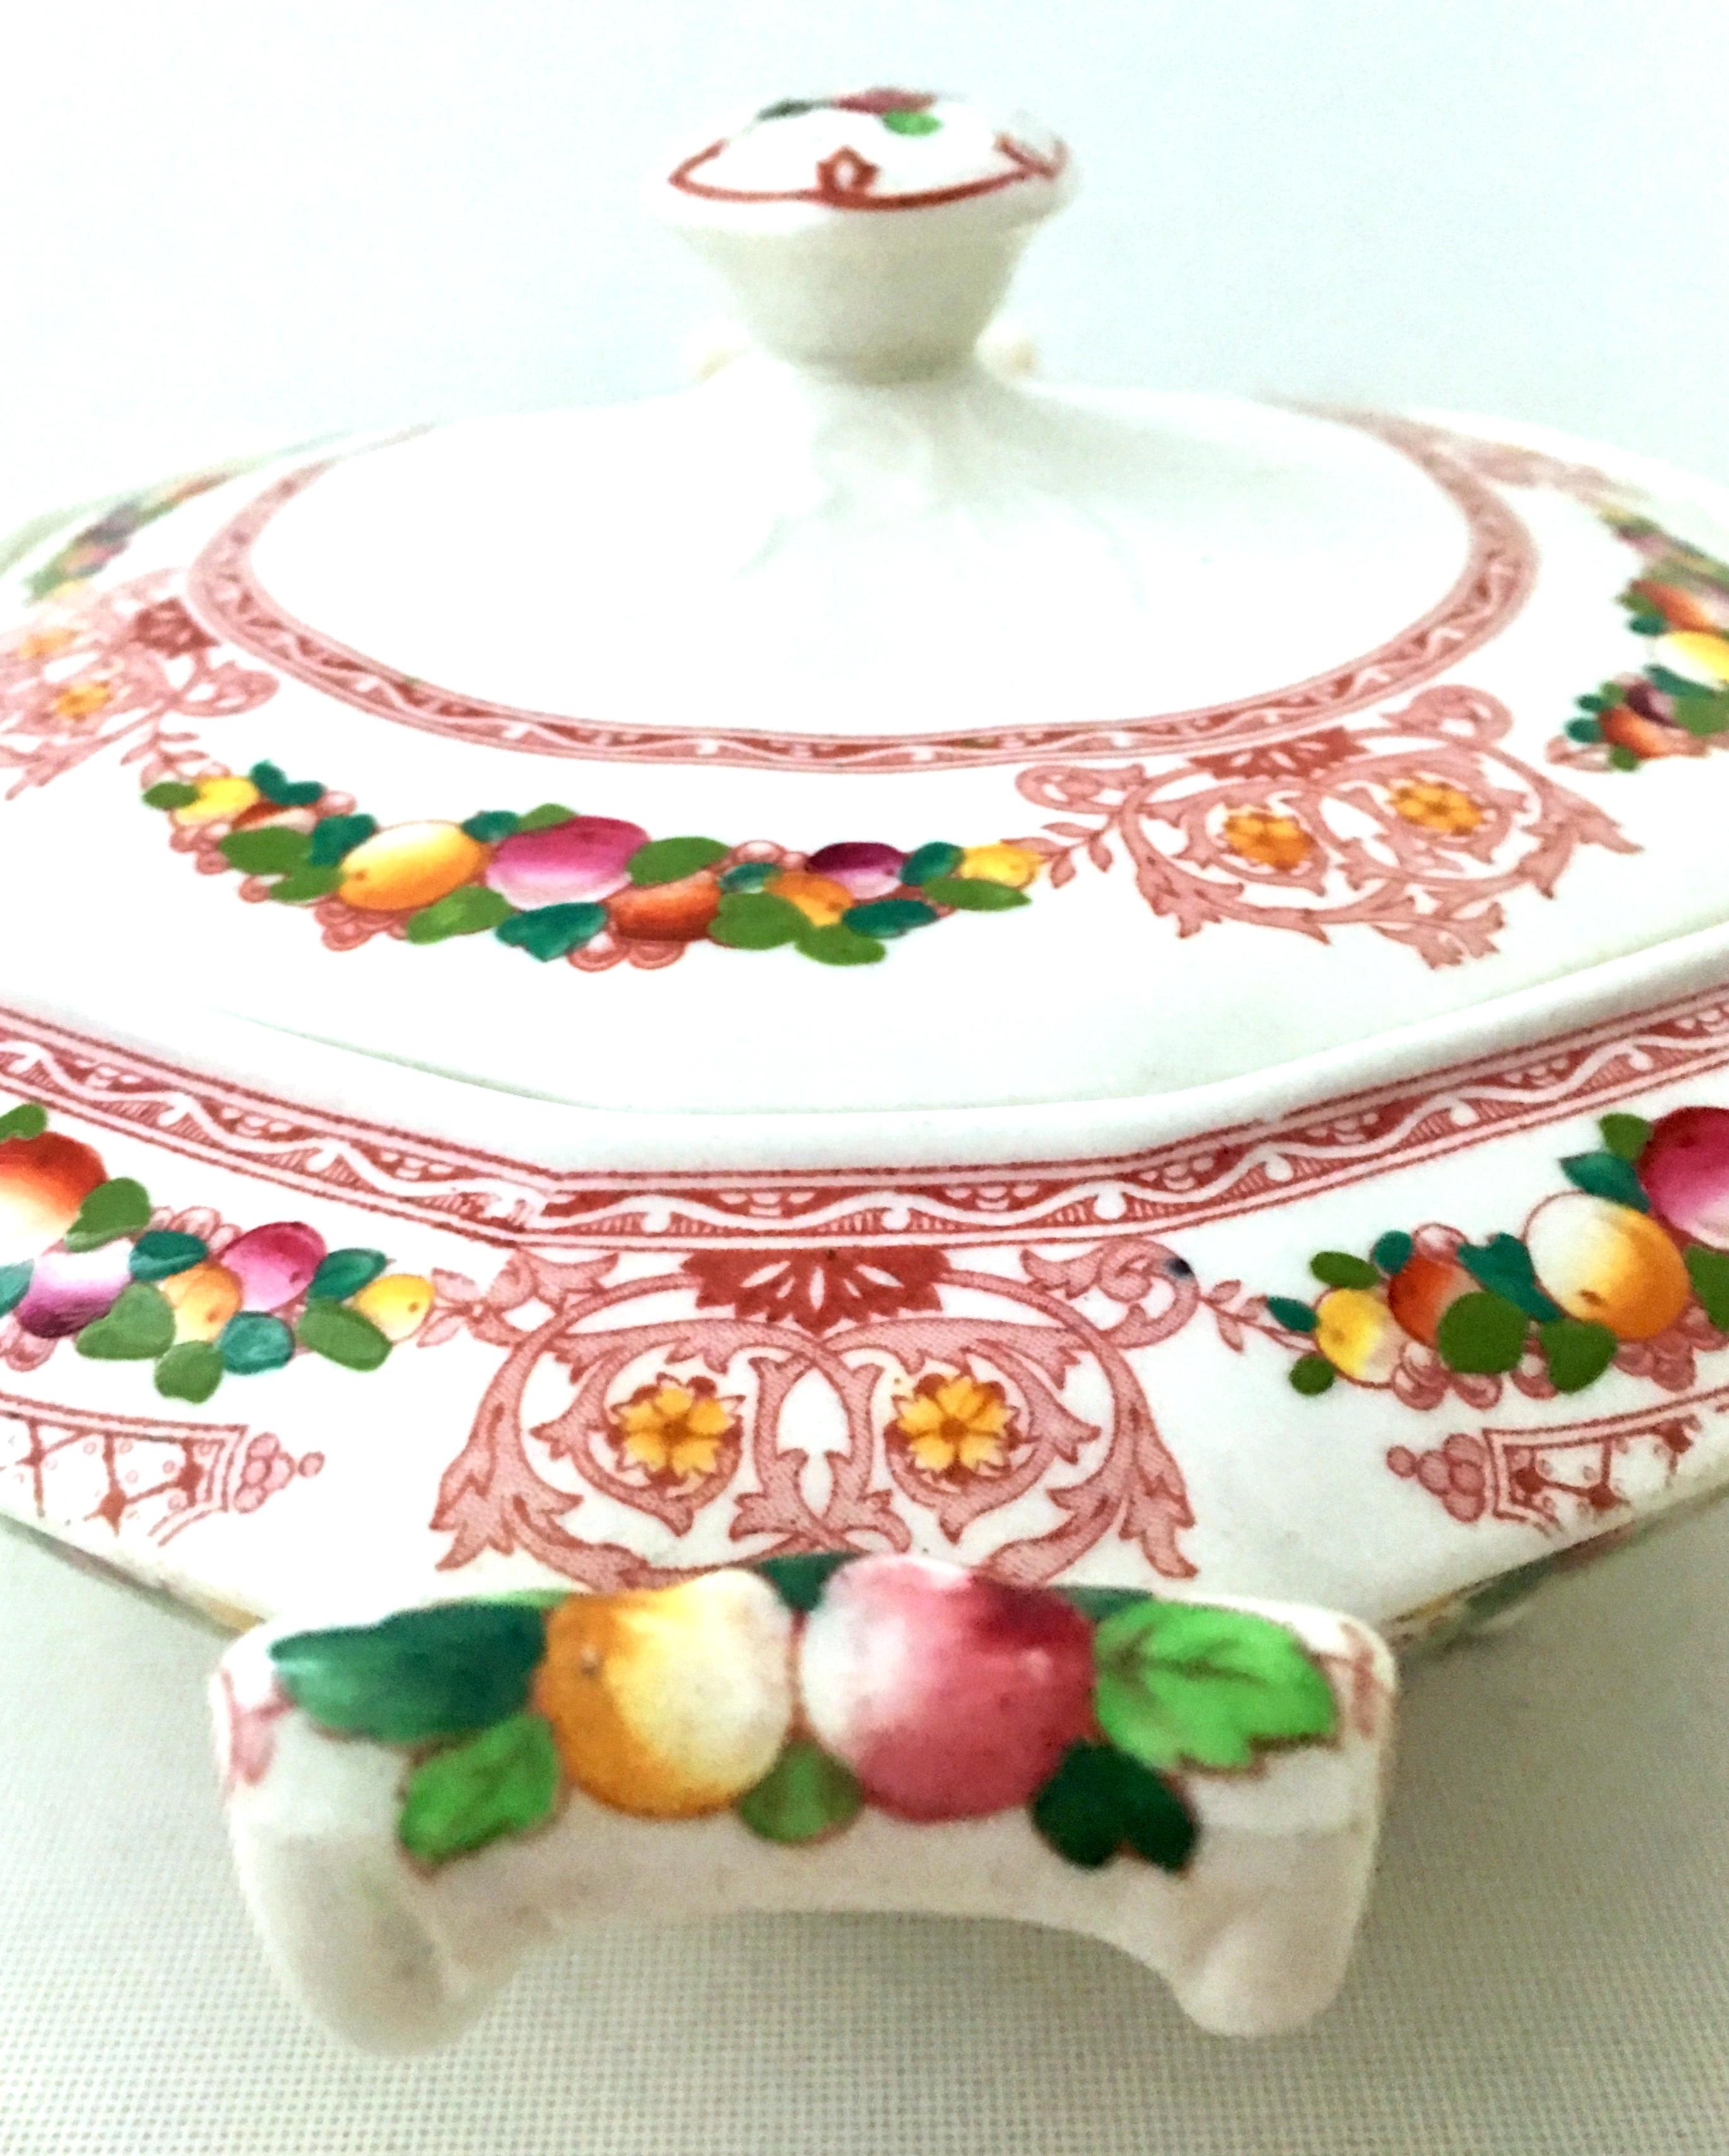 19th Century Antique Alfred Meakin English Ironstone Vegetable Serving Dish 